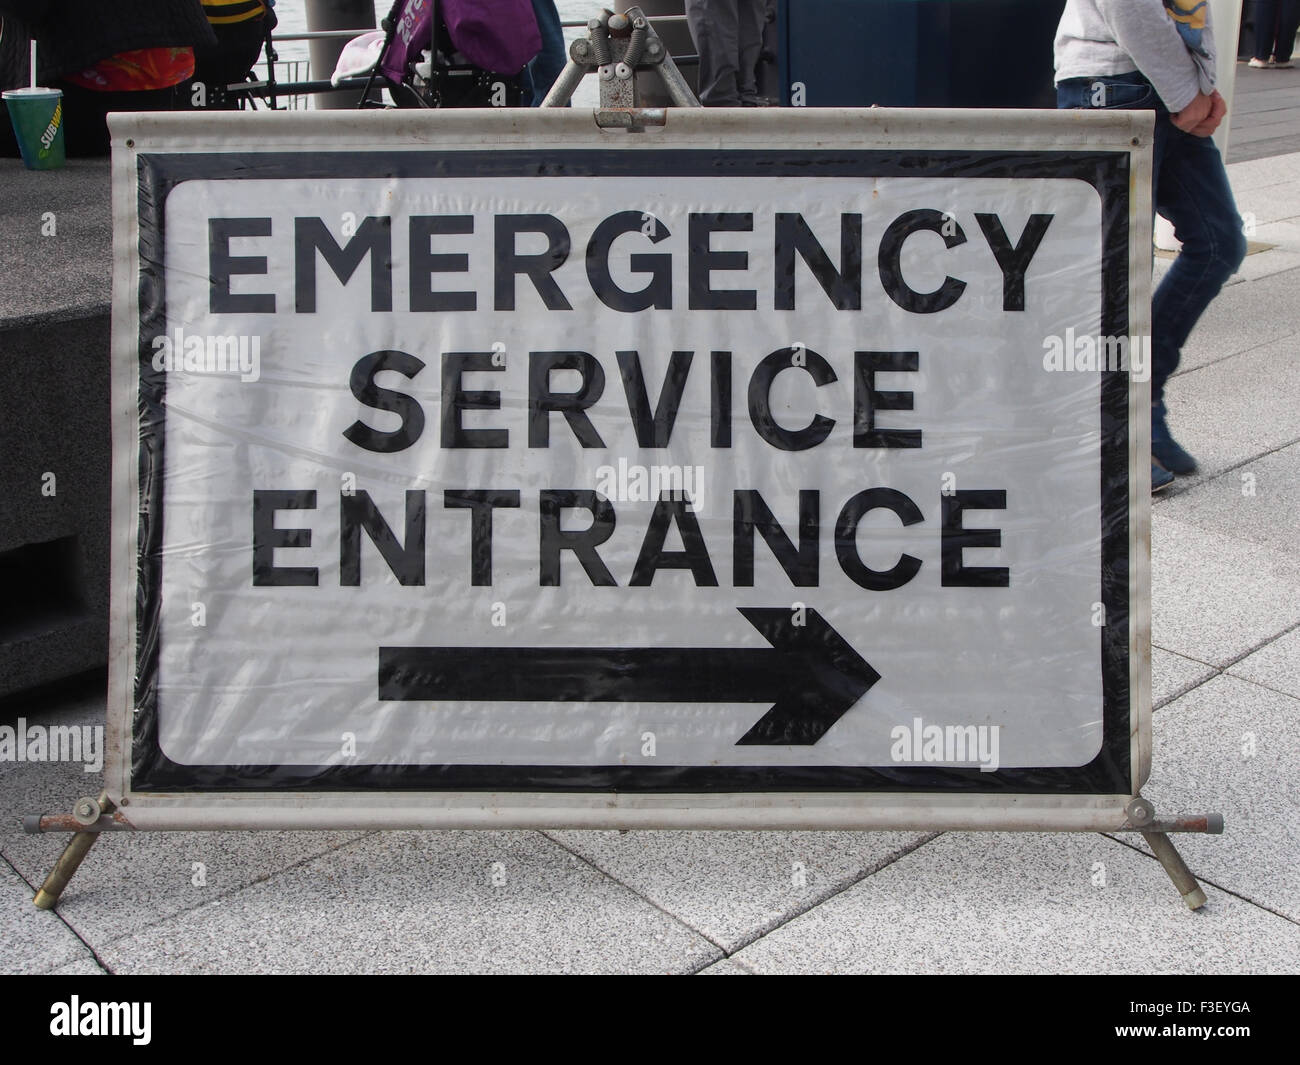 Emergency services entrance sign Stock Photo